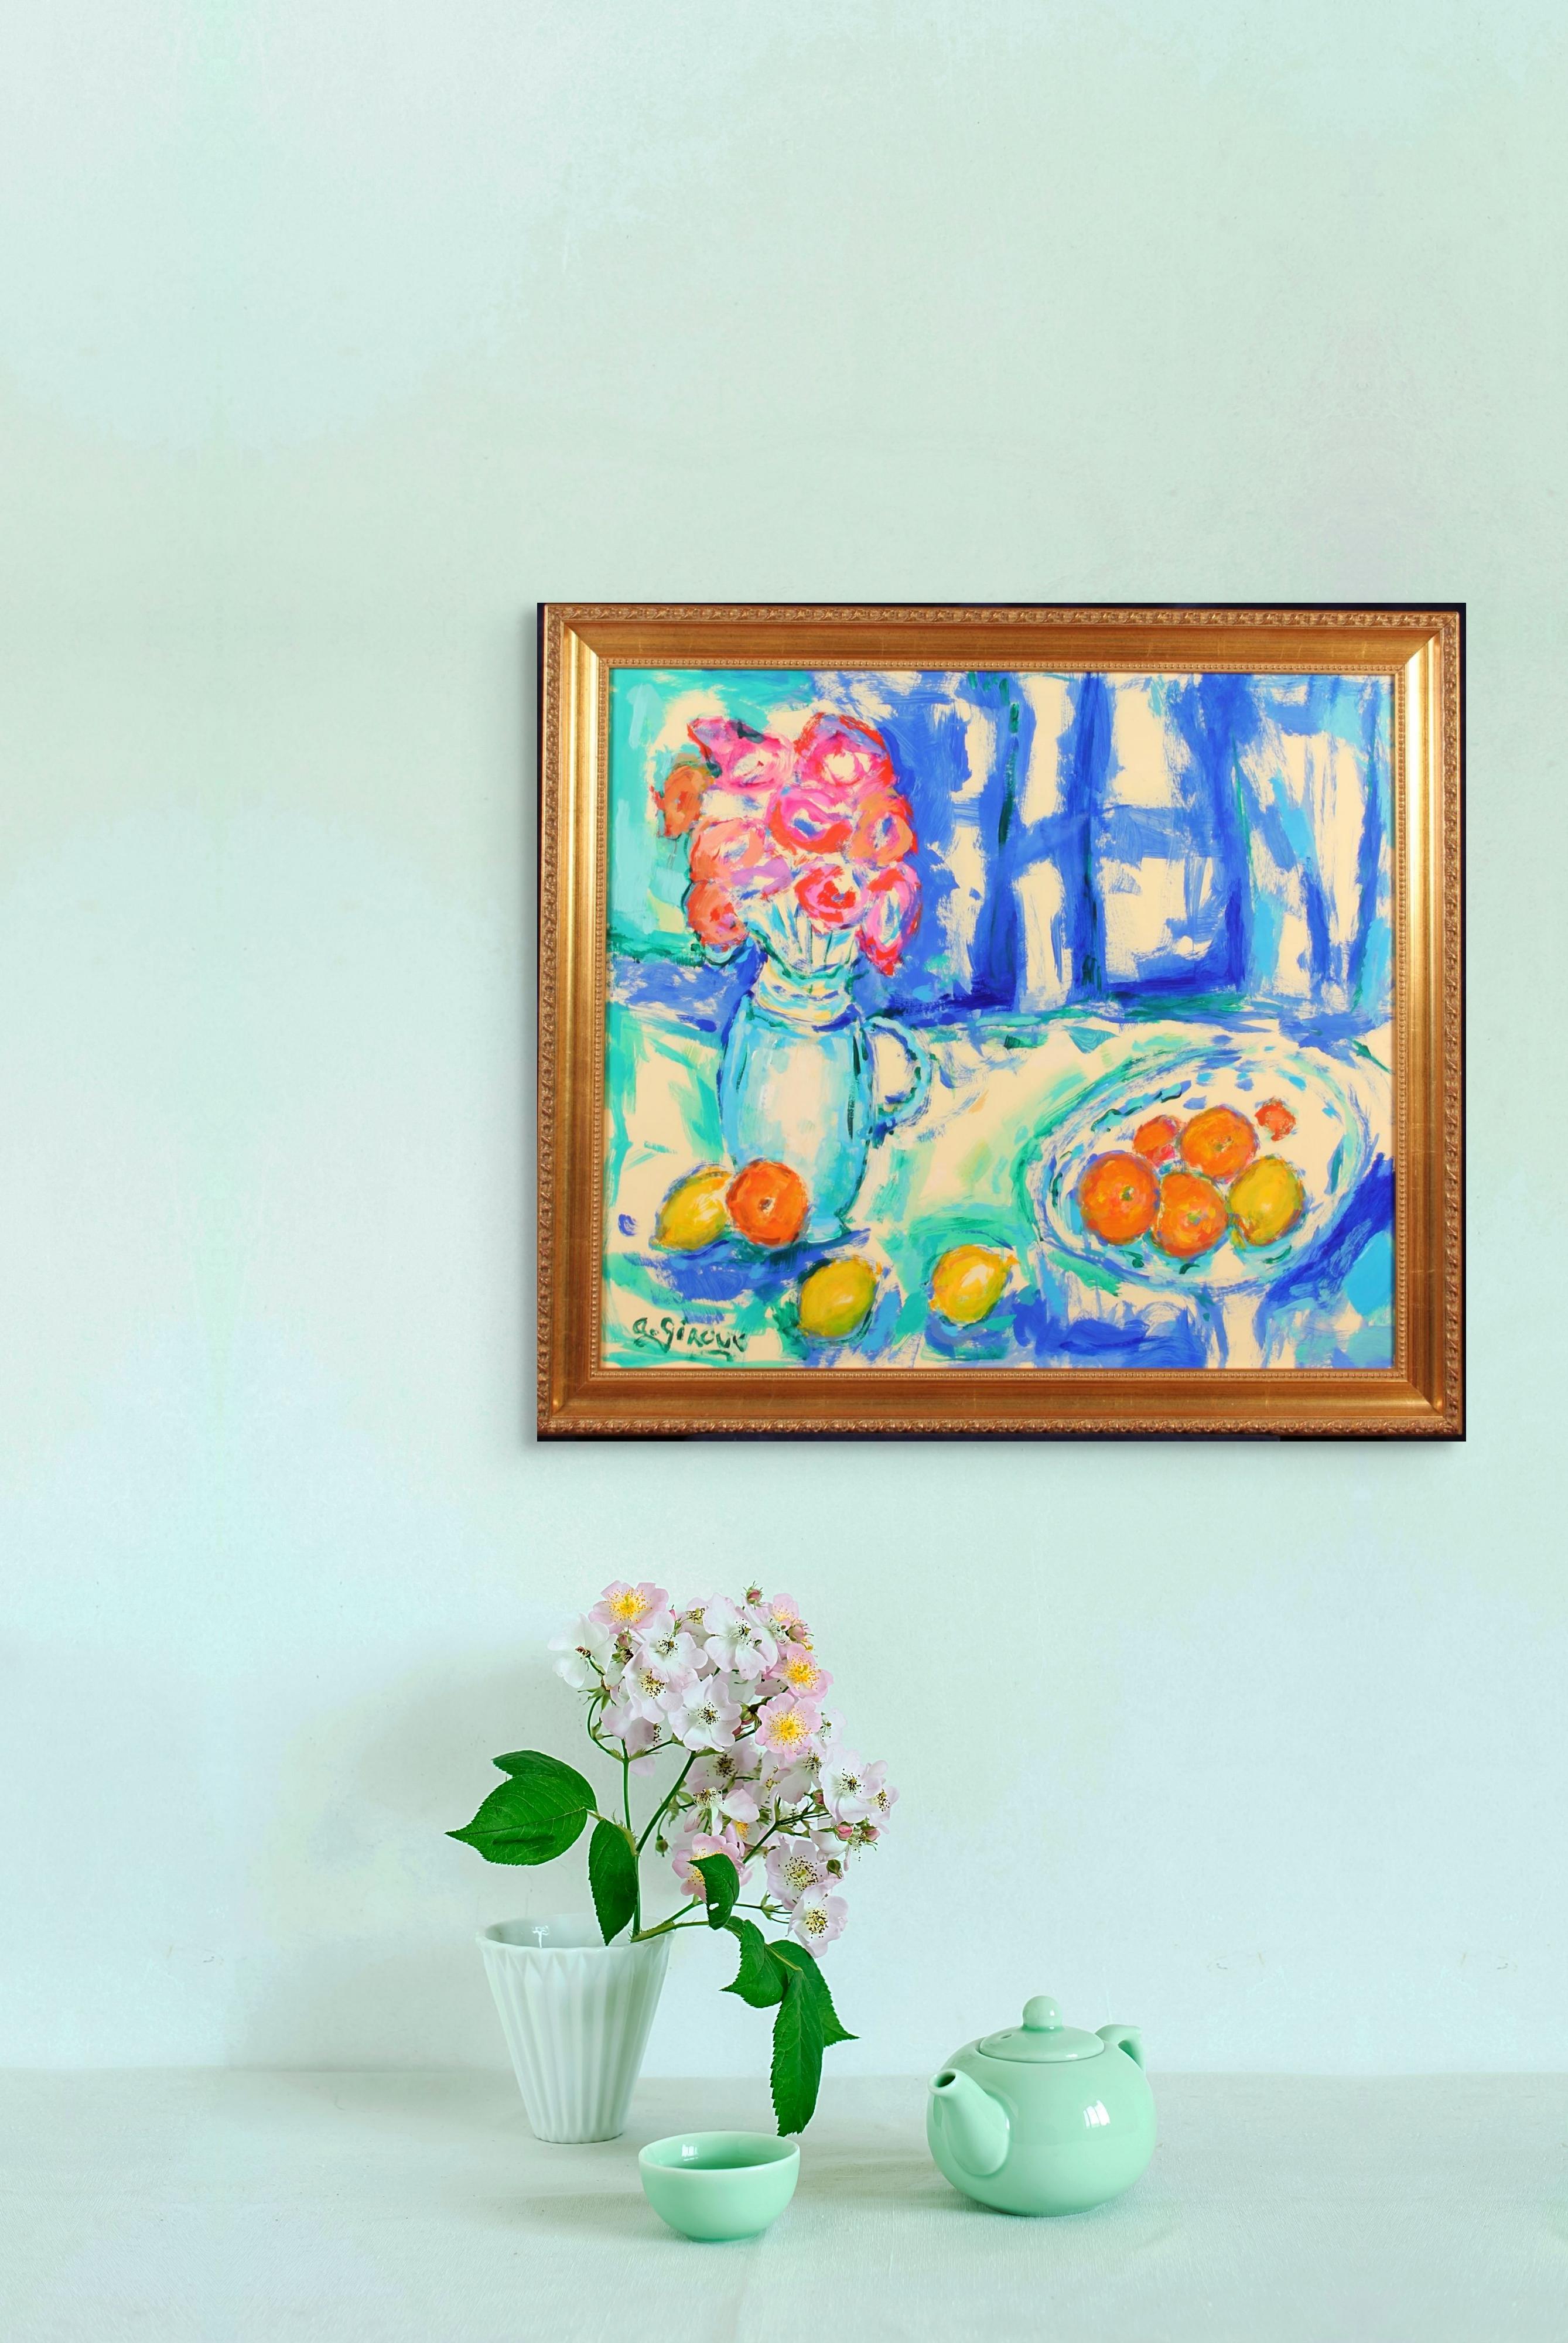 Belgian Antoine Giroux Fauvist Painting - Fruits and Flowers Still Life - Ref 467 For Sale